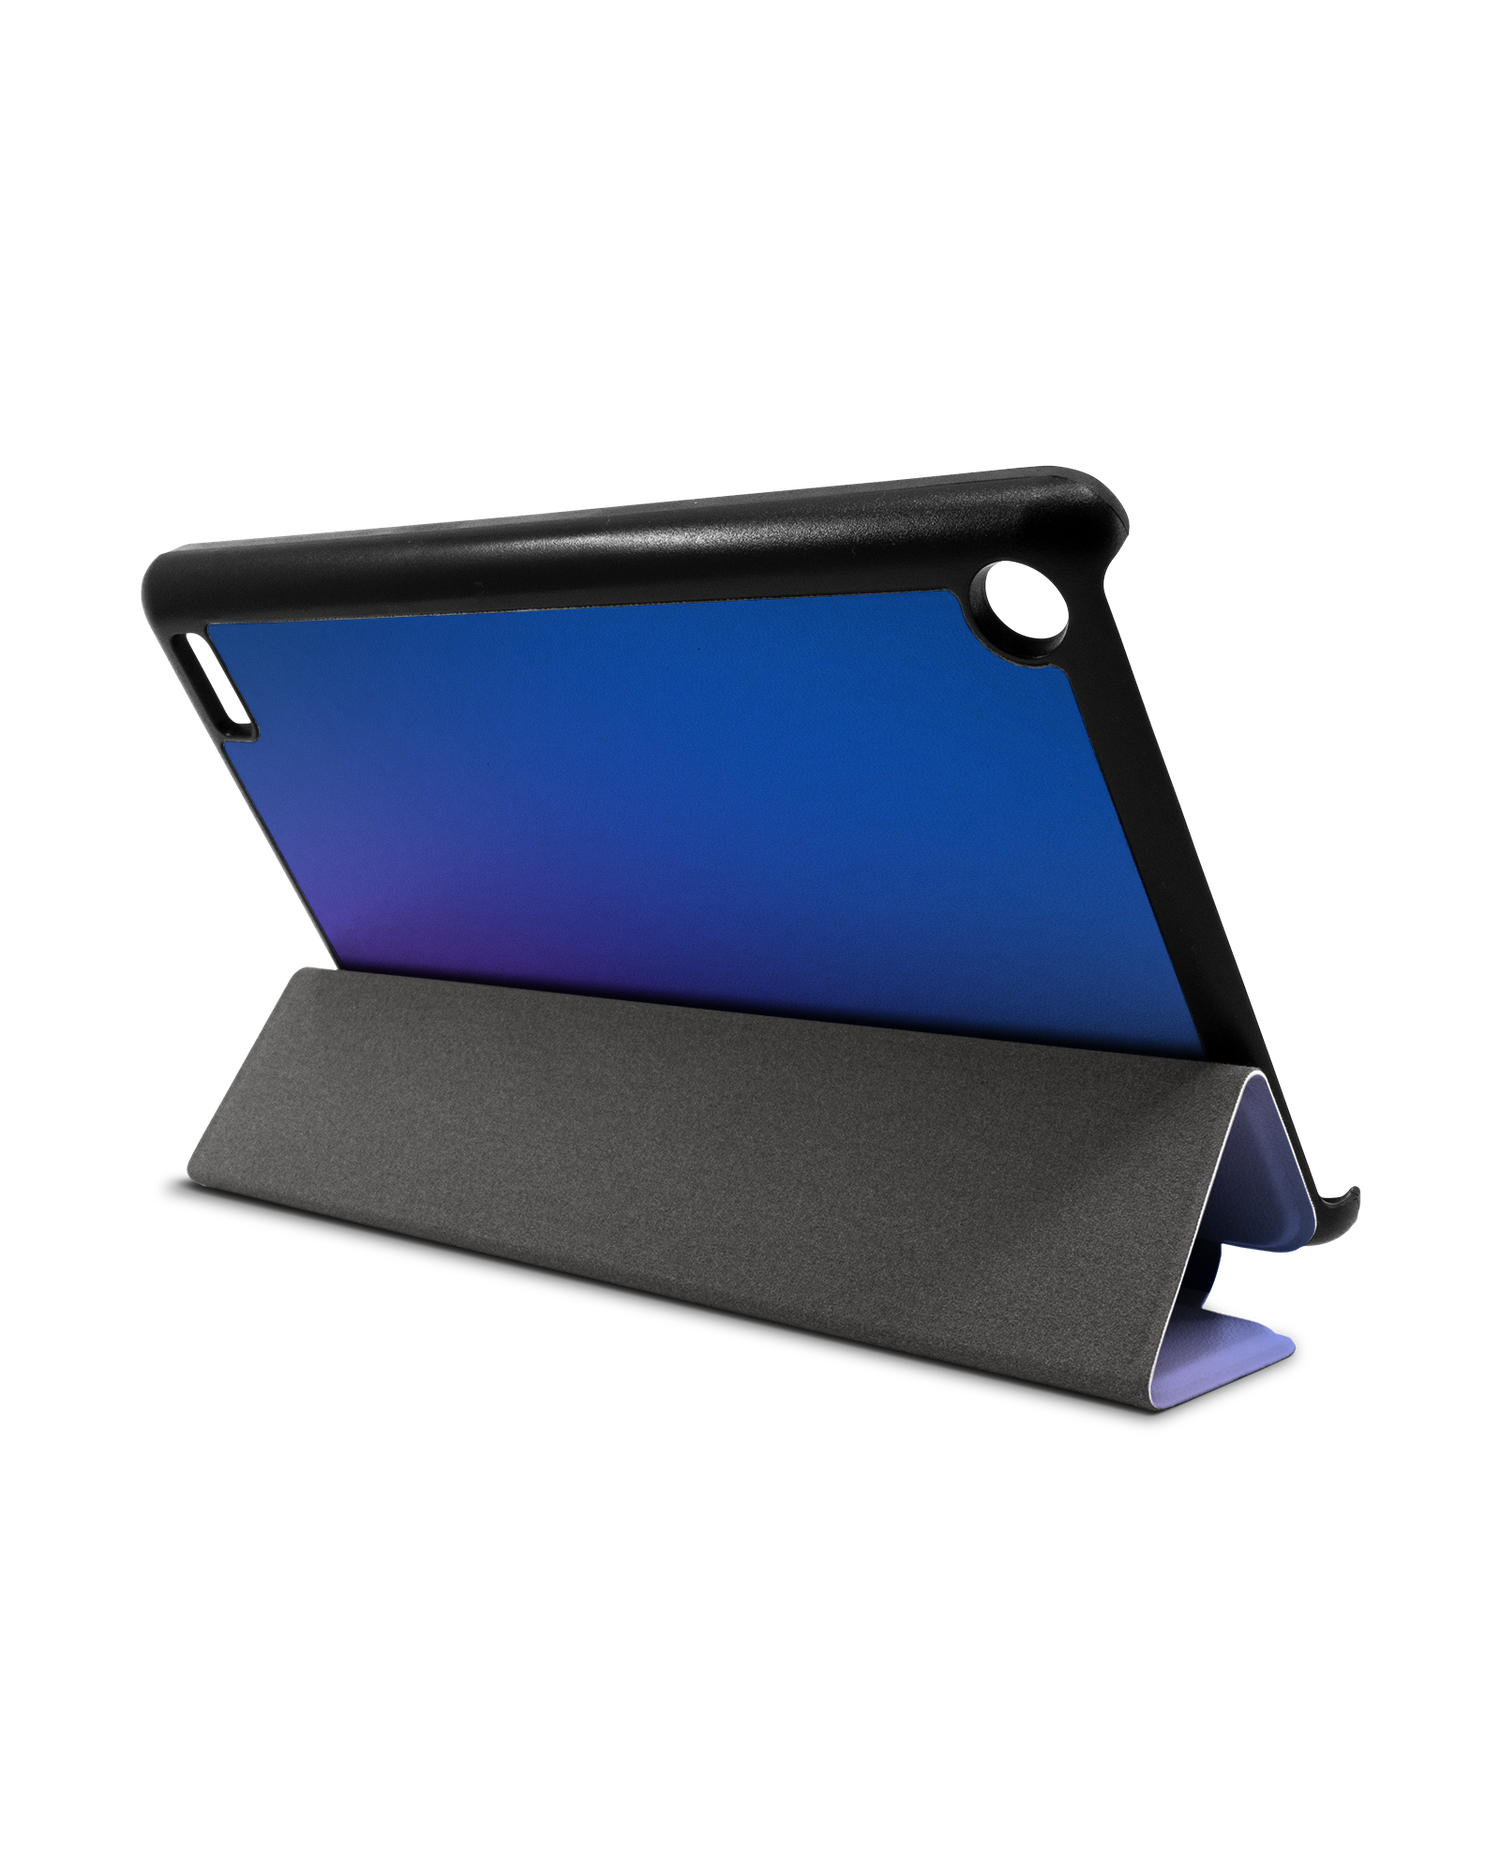 Blueberry Tablet Smart Case for Amazon Fire 7: Used as Stand